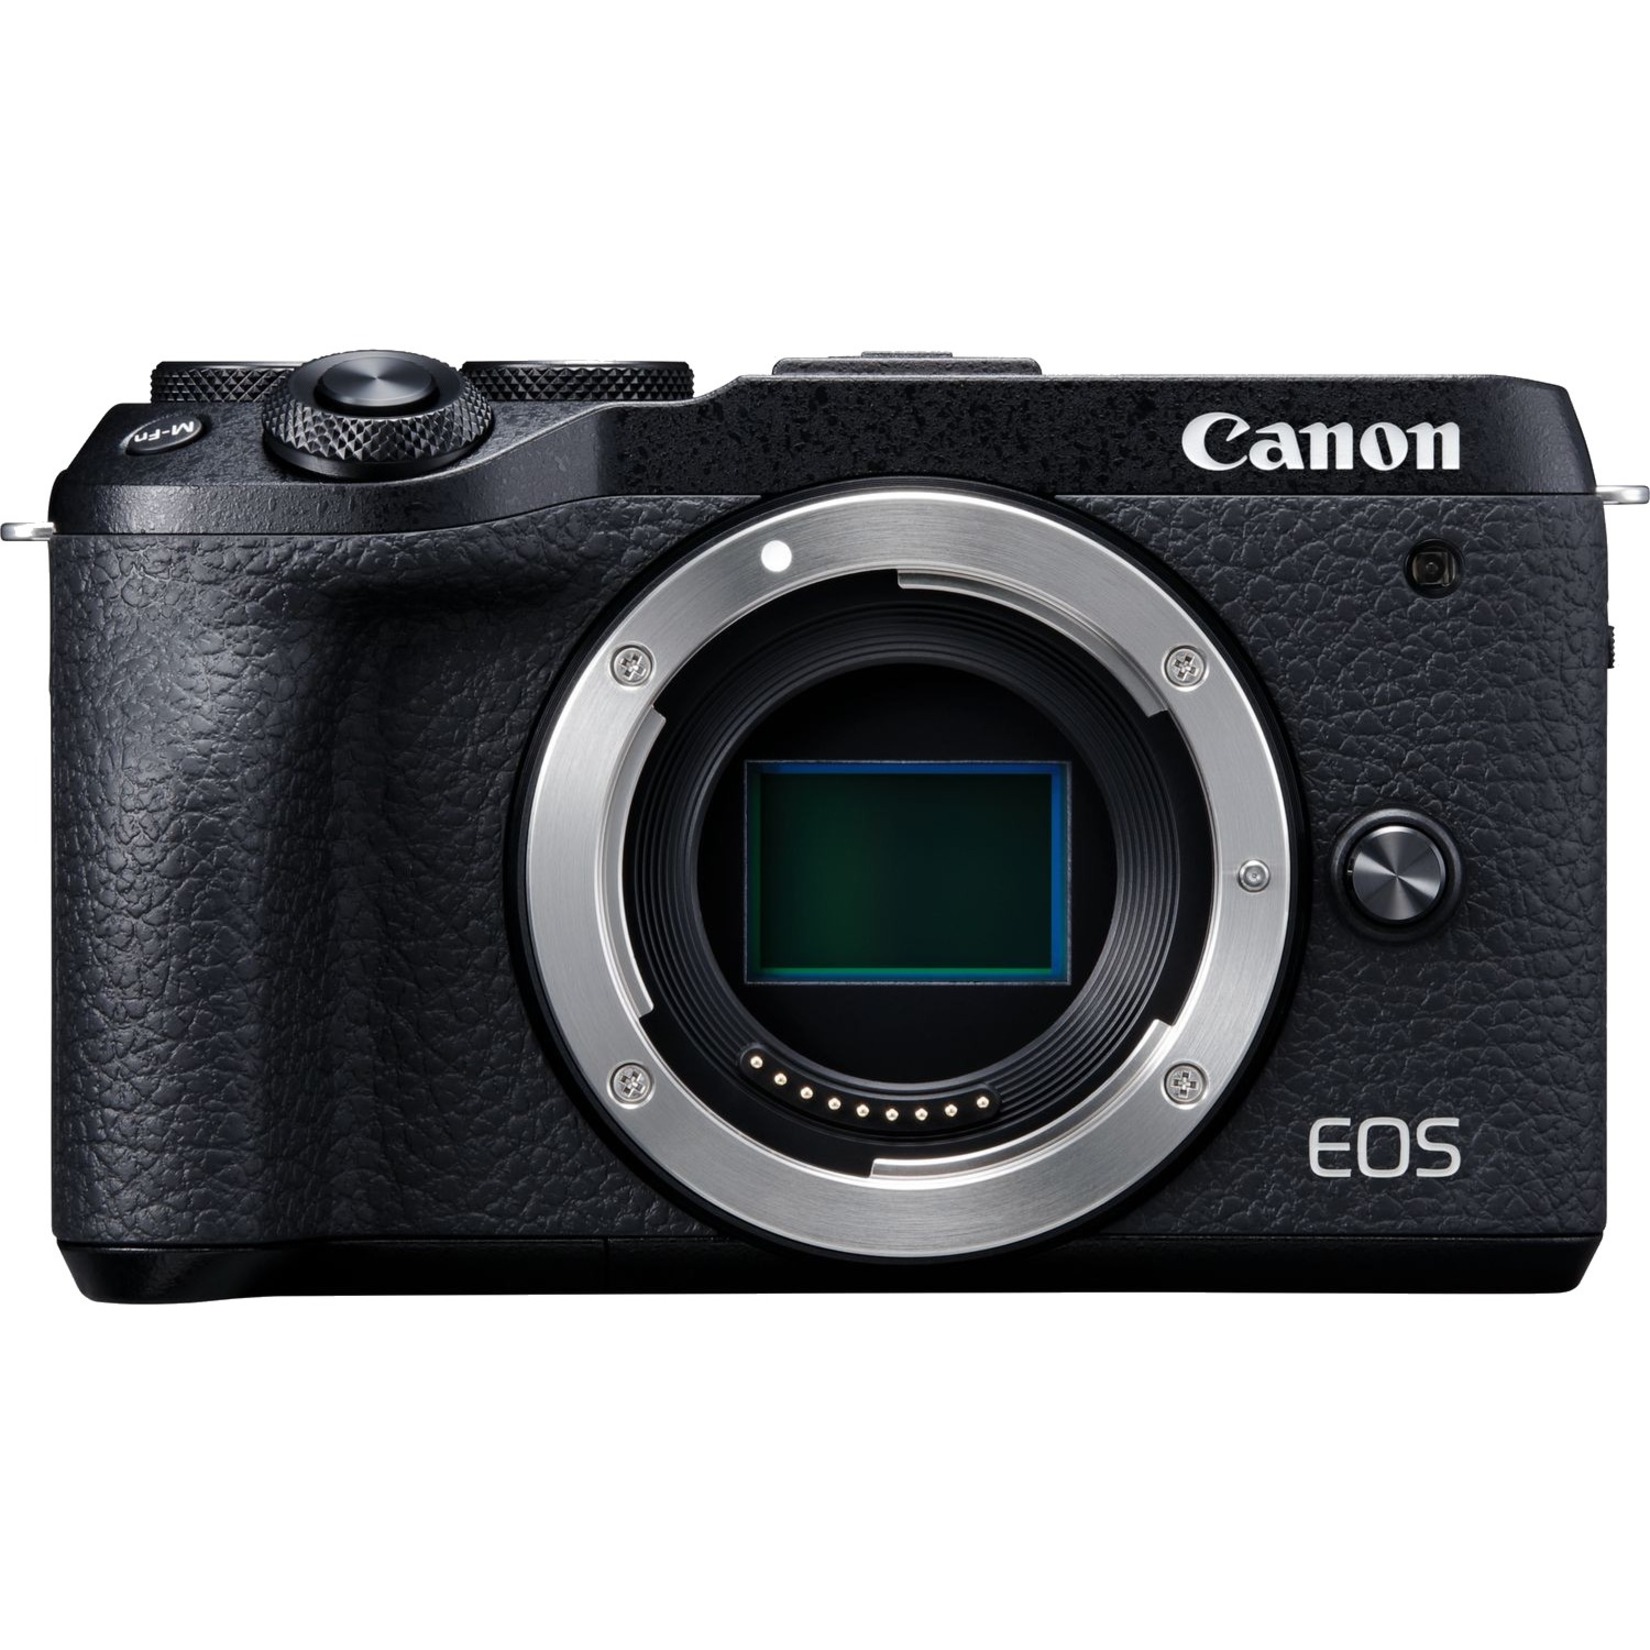 Canon EOS M6 Mark II 32.5 Megapixel Mirrorless Camera Body Only, Black - image 1 of 3